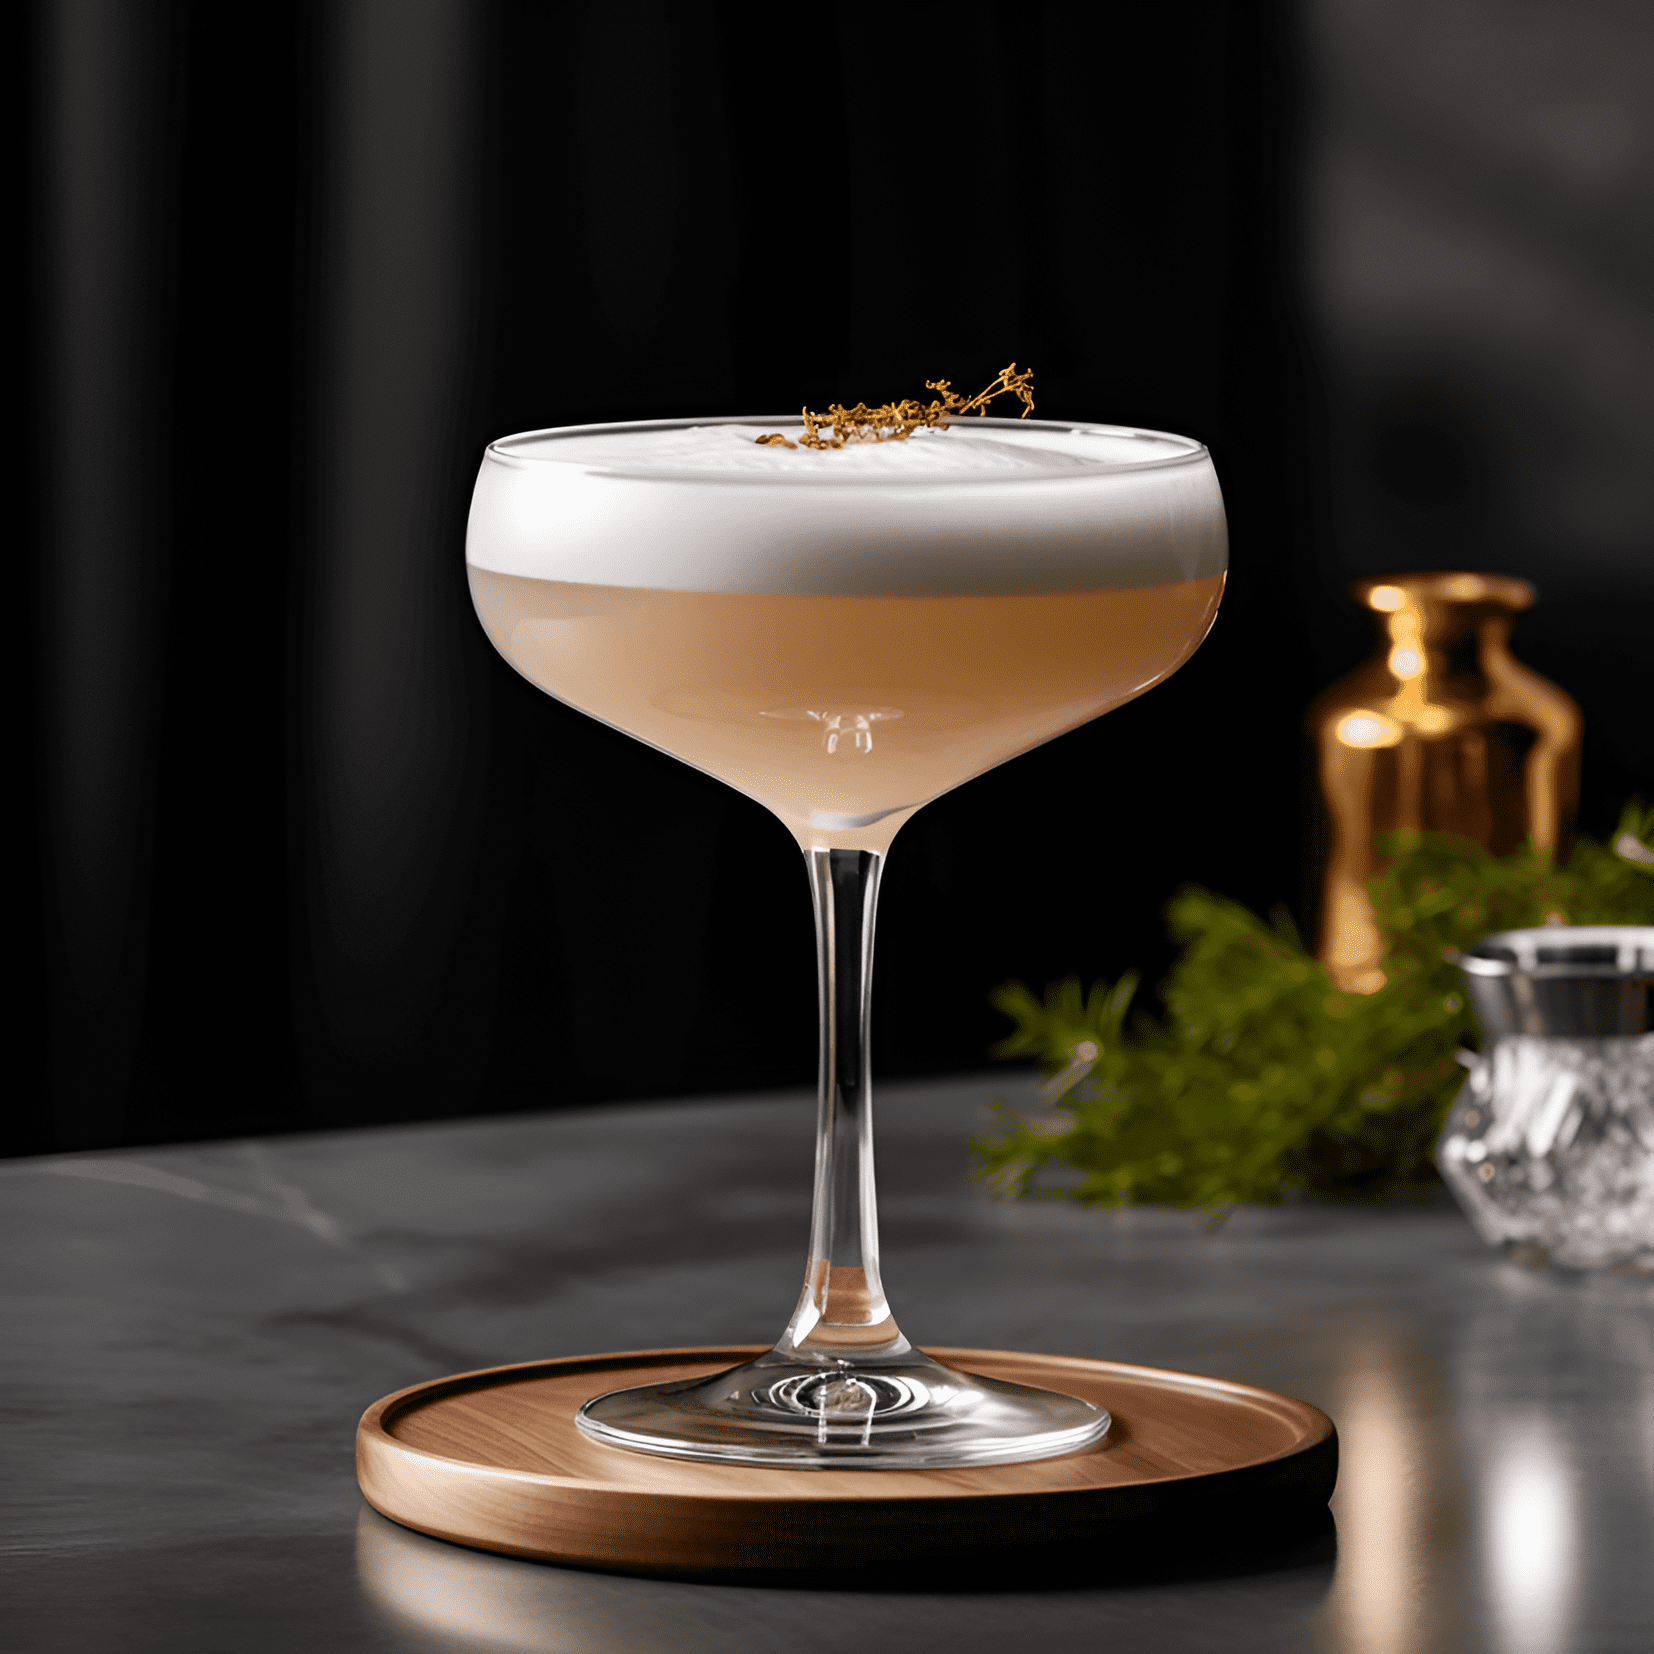 Monk's Dream Cocktail Recipe - The Monk's Dream cocktail has a complex, herbal taste with a hint of sweetness and a touch of sourness. The combination of ingredients creates a harmonious balance between strong and light flavors, making it a delightful and refreshing drink.